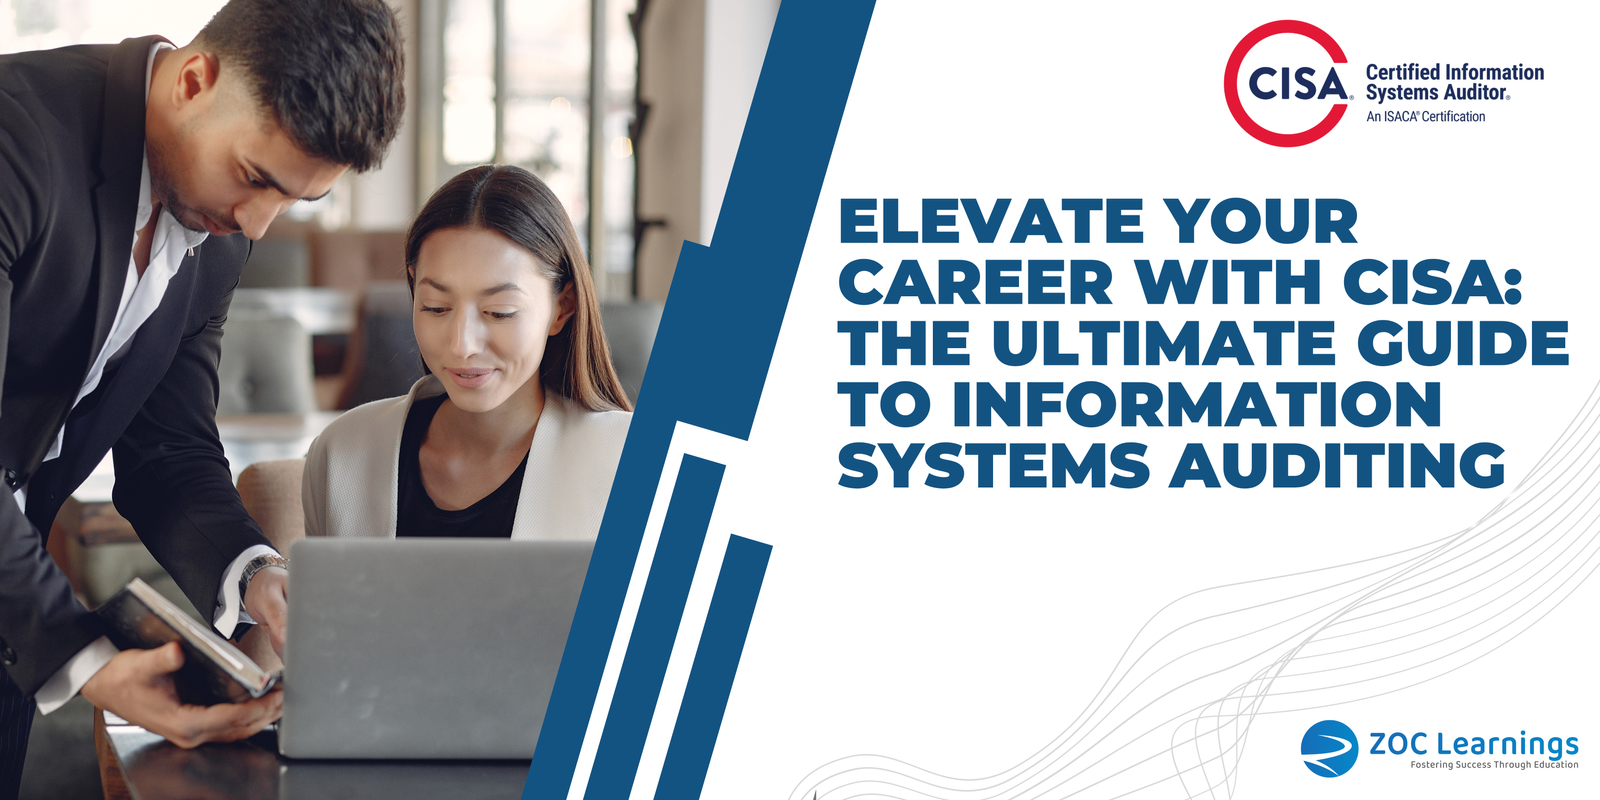 Elevate Your Career with CISA: The Ultimate Guide to Information Systems Auditing